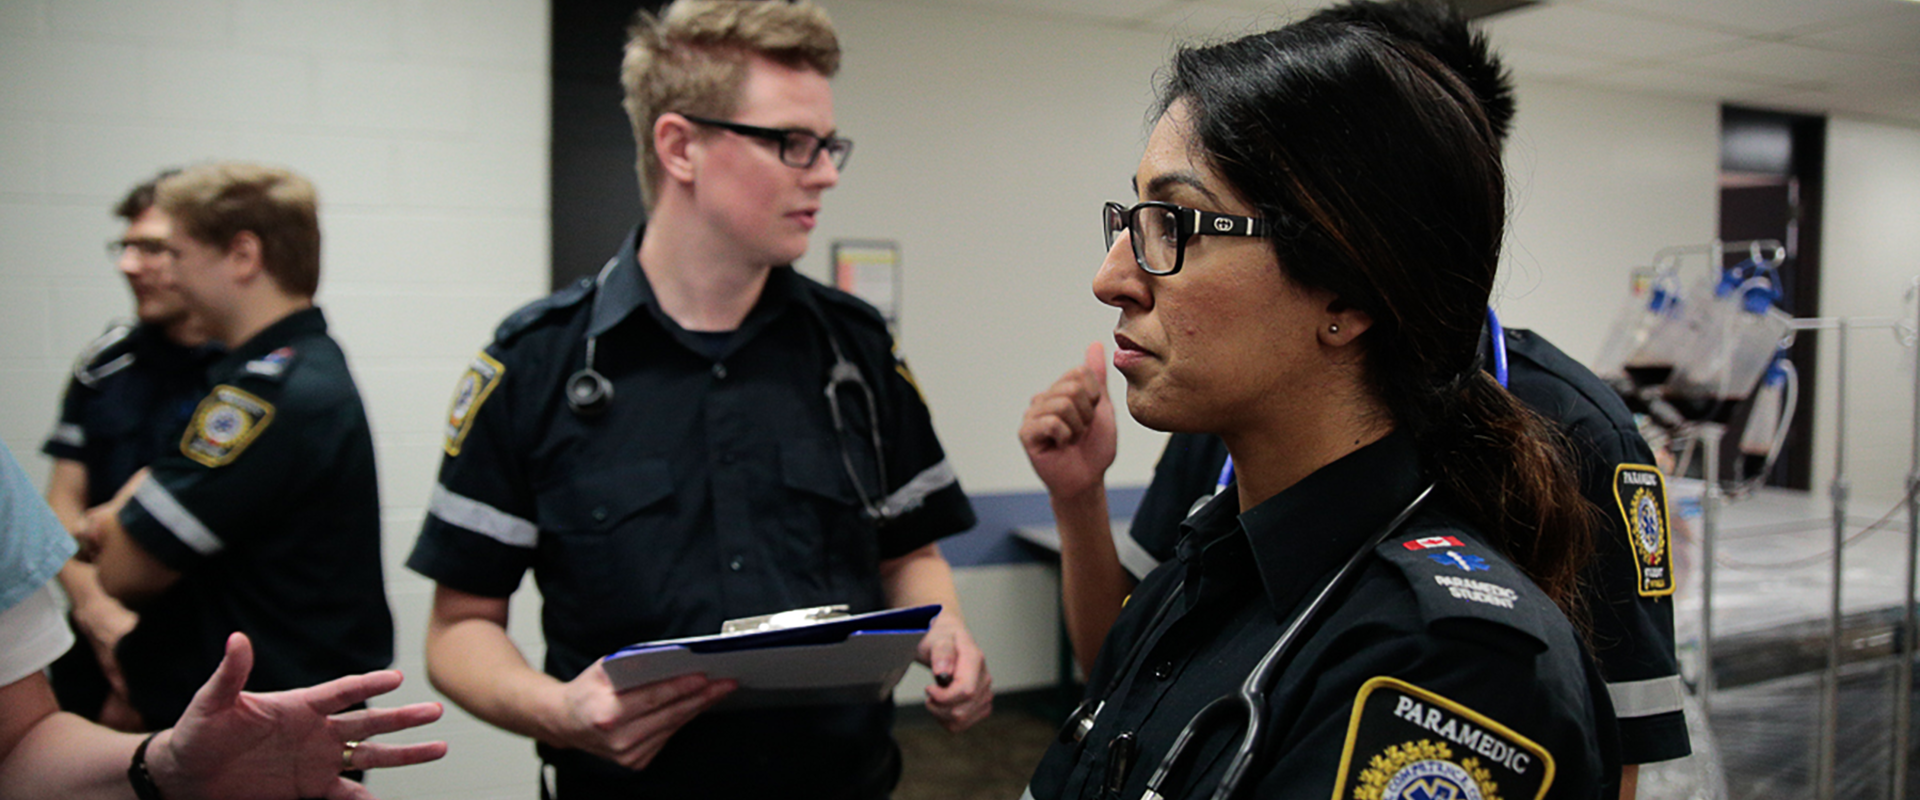 Paramedic students gathered in a room; a woman is the foreground, a man with a clipboard in the background.